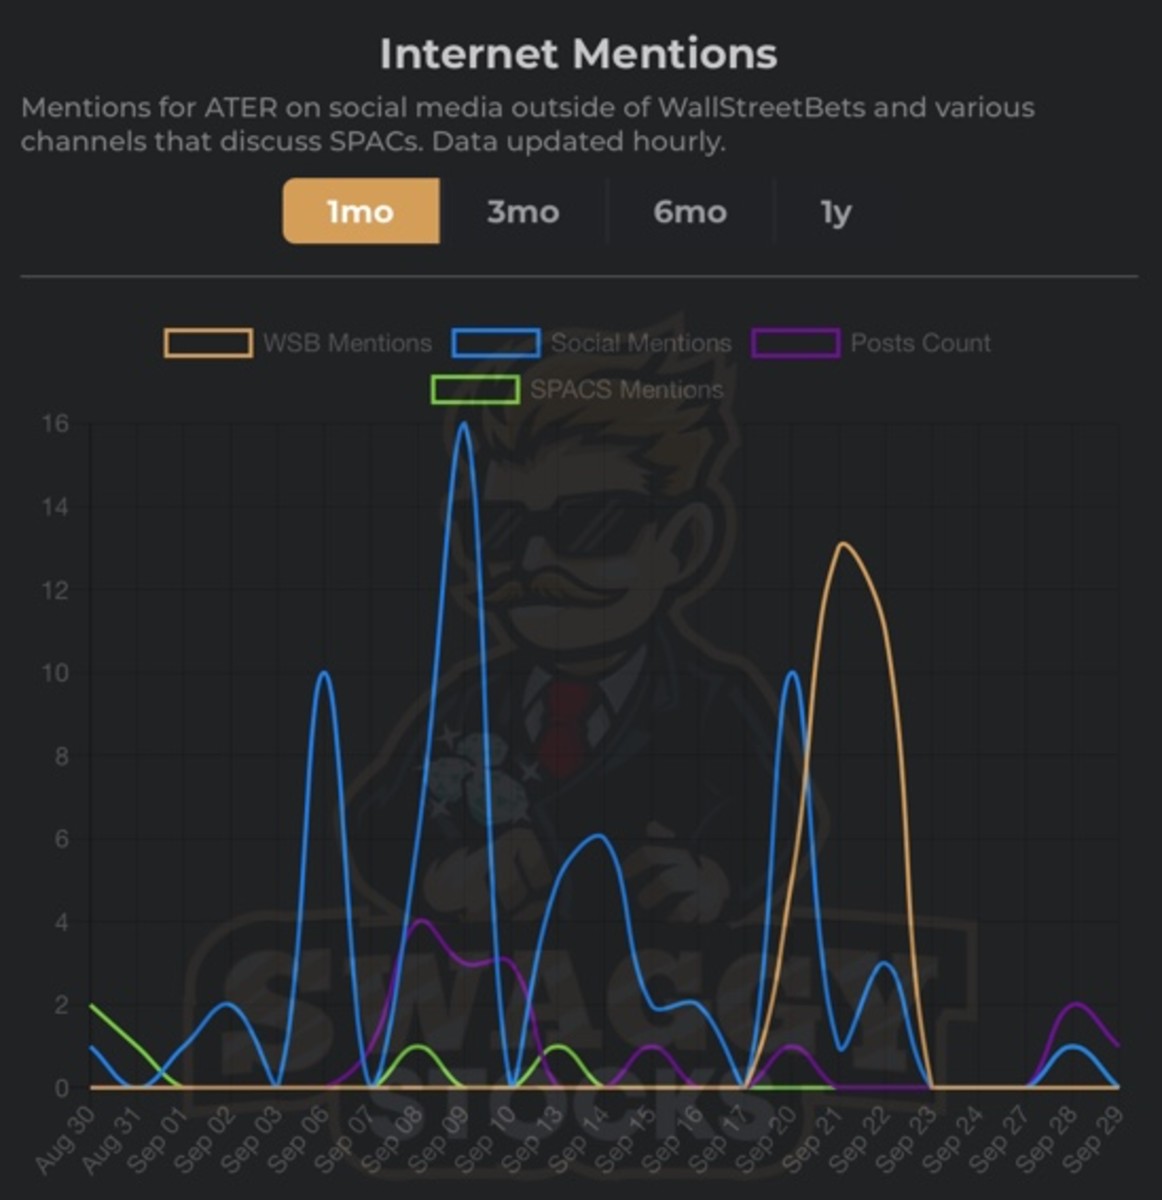 Figure 3: $ATER mentions on social media, WSB and various channels.